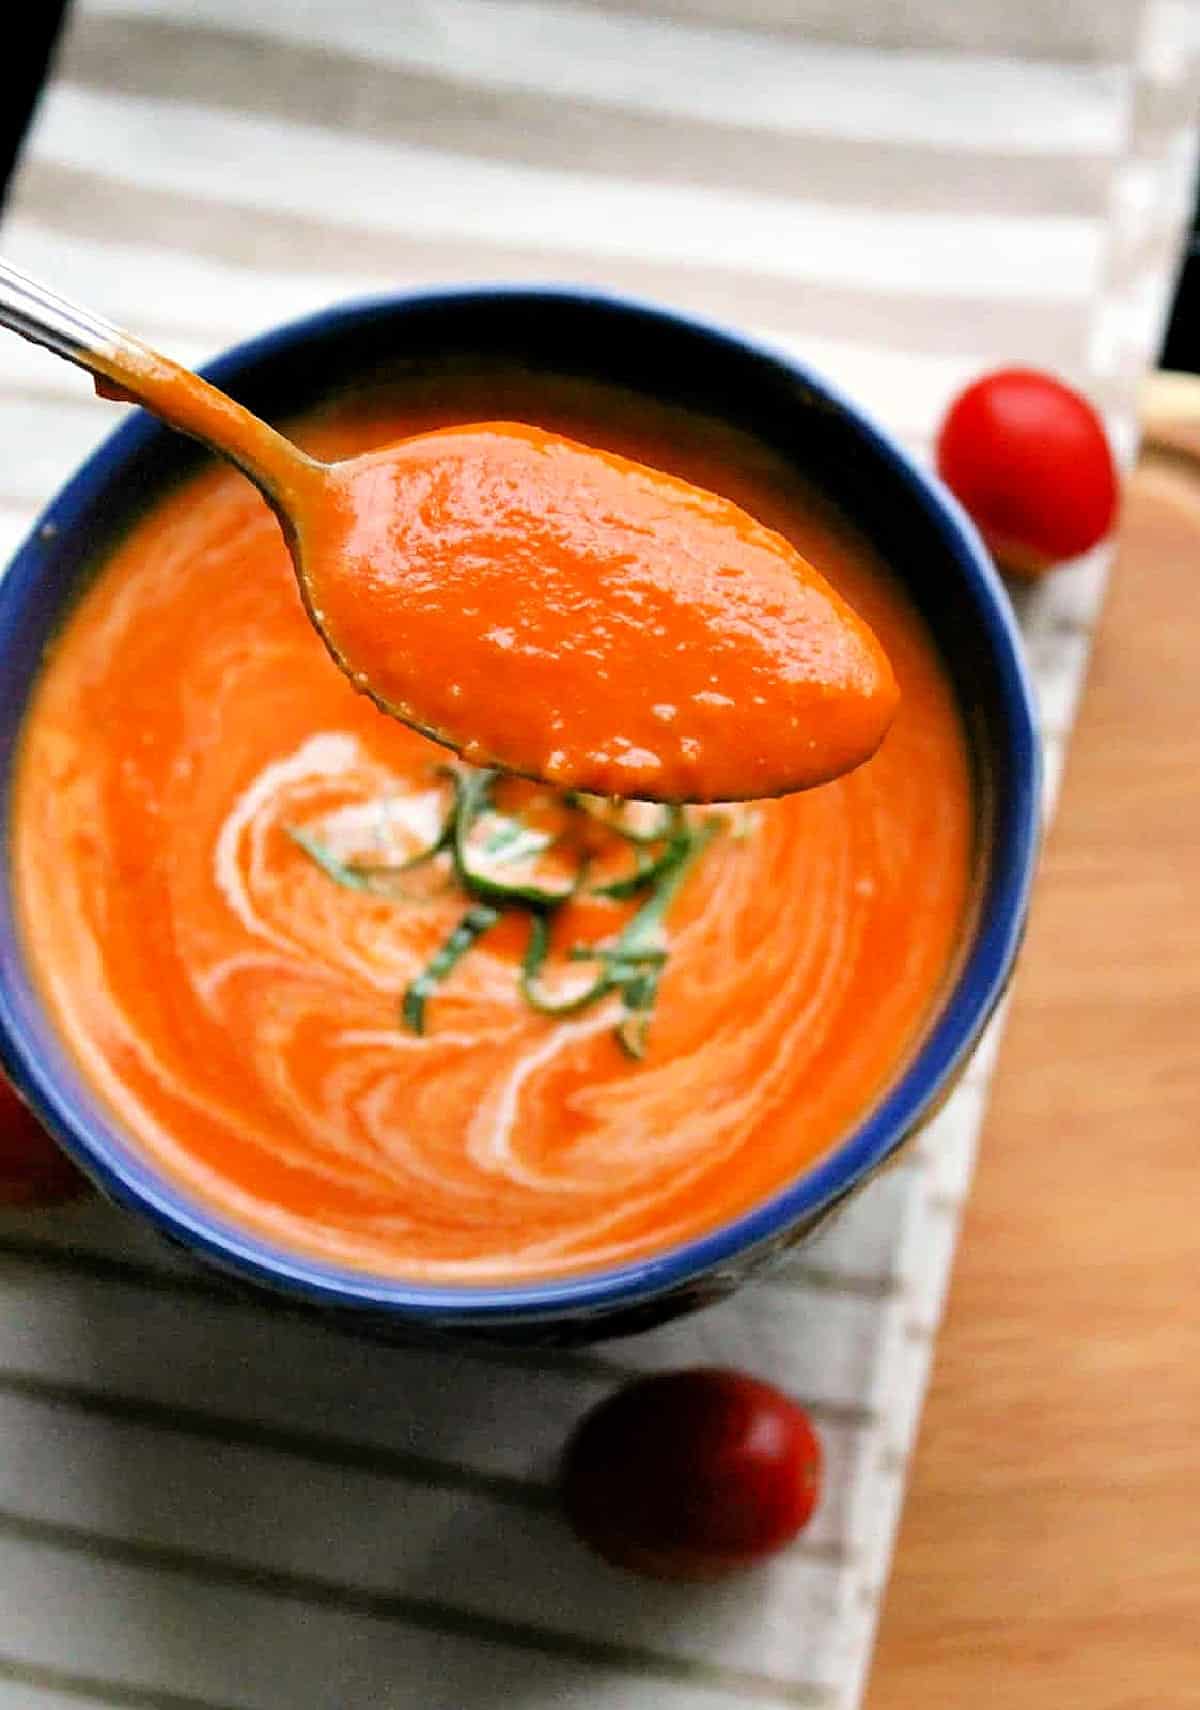 A spoonful of spicy tomato soup being held up over a bowl.